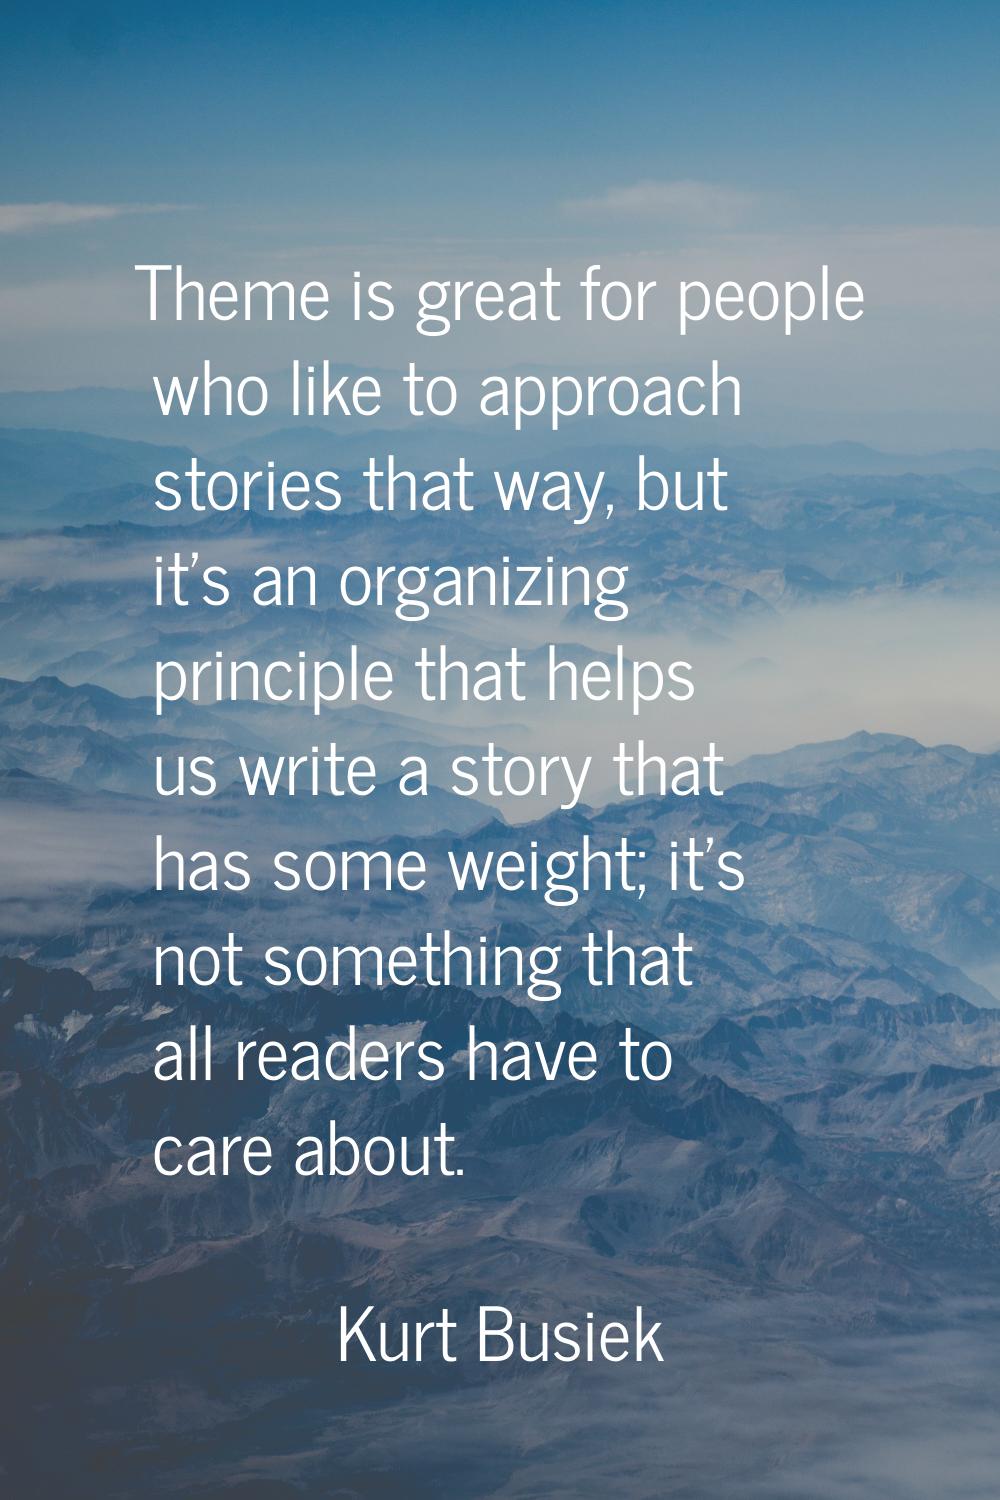 Theme is great for people who like to approach stories that way, but it's an organizing principle t